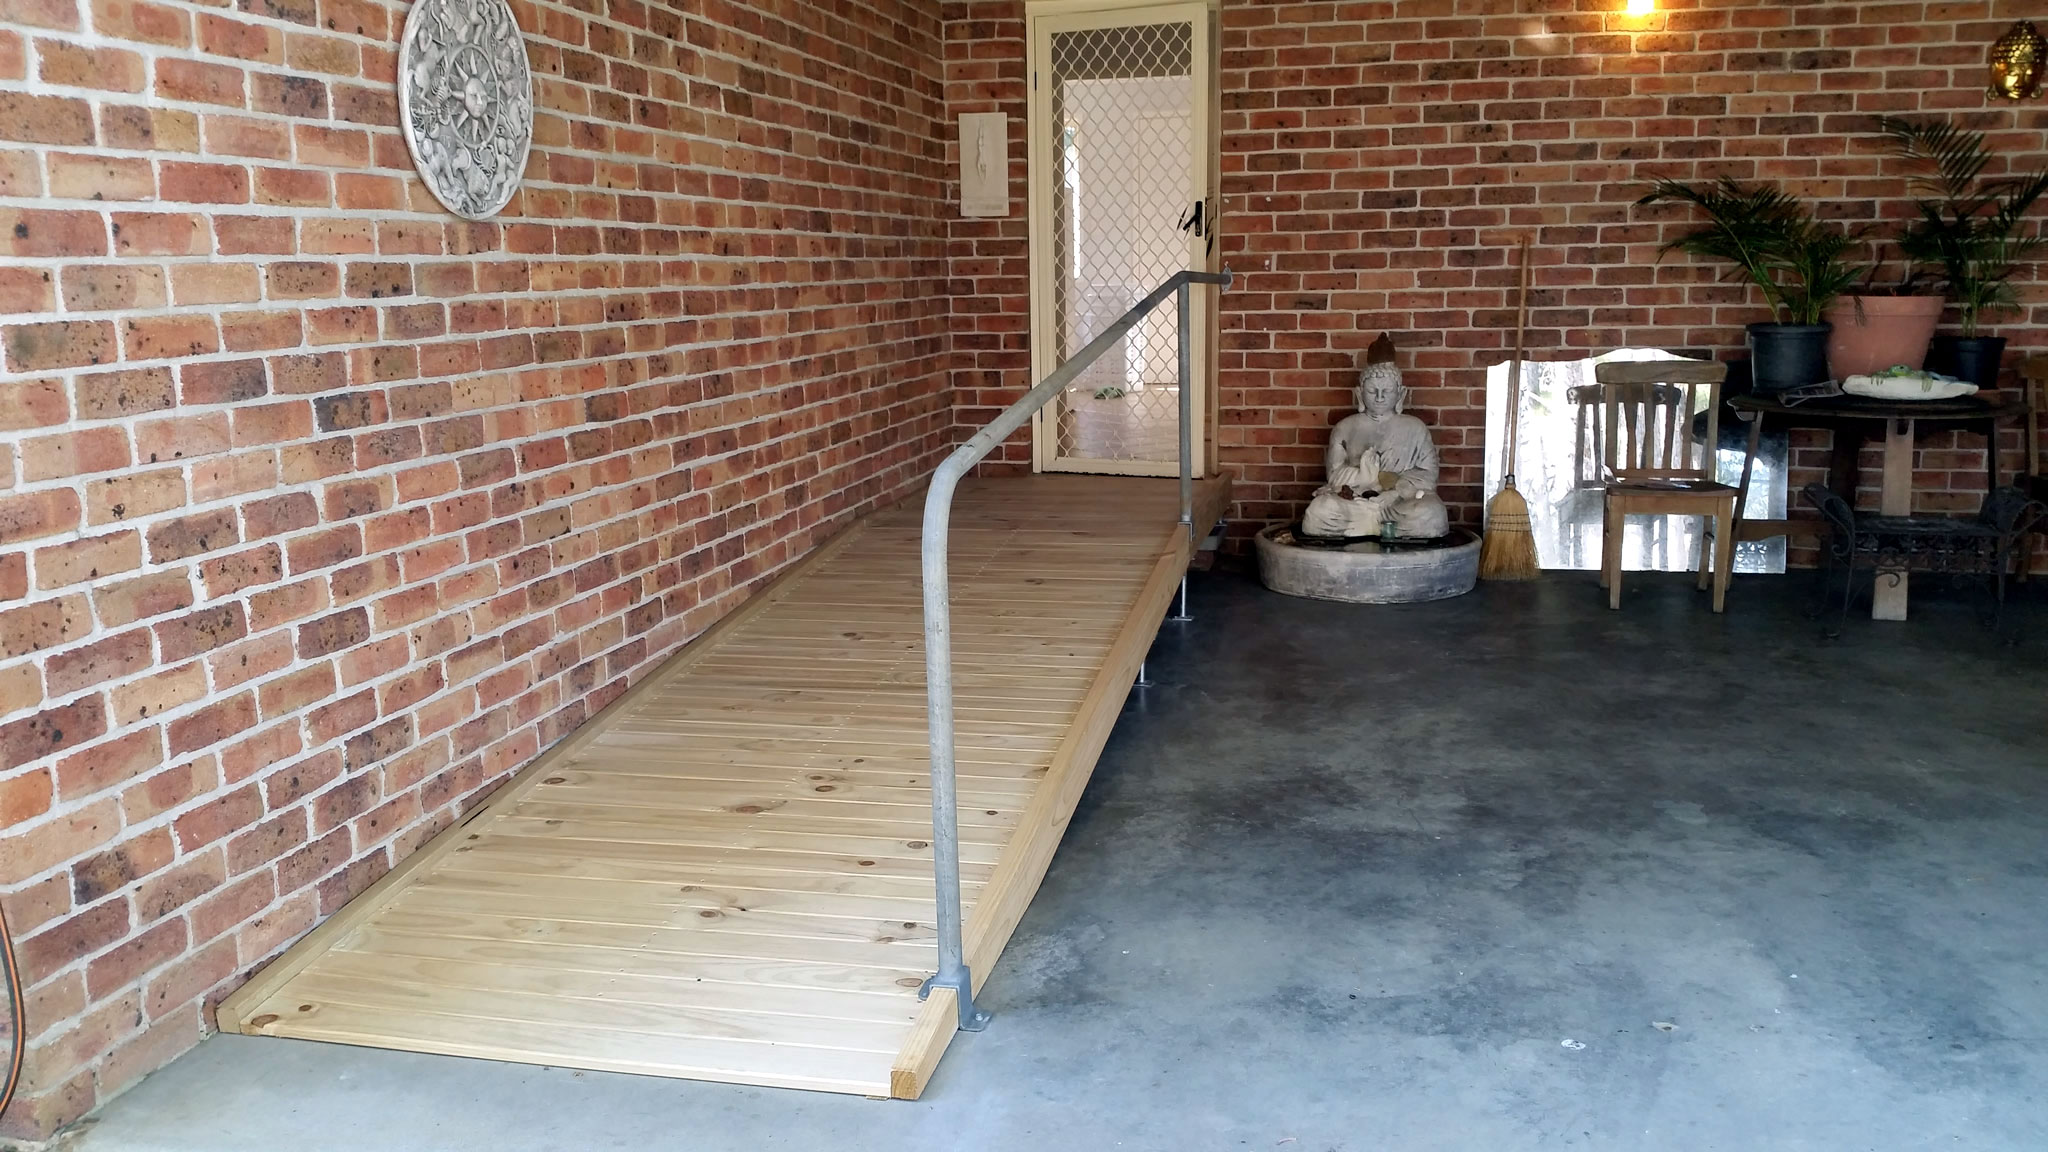 Photo showing a disability ramp constructed by the shed